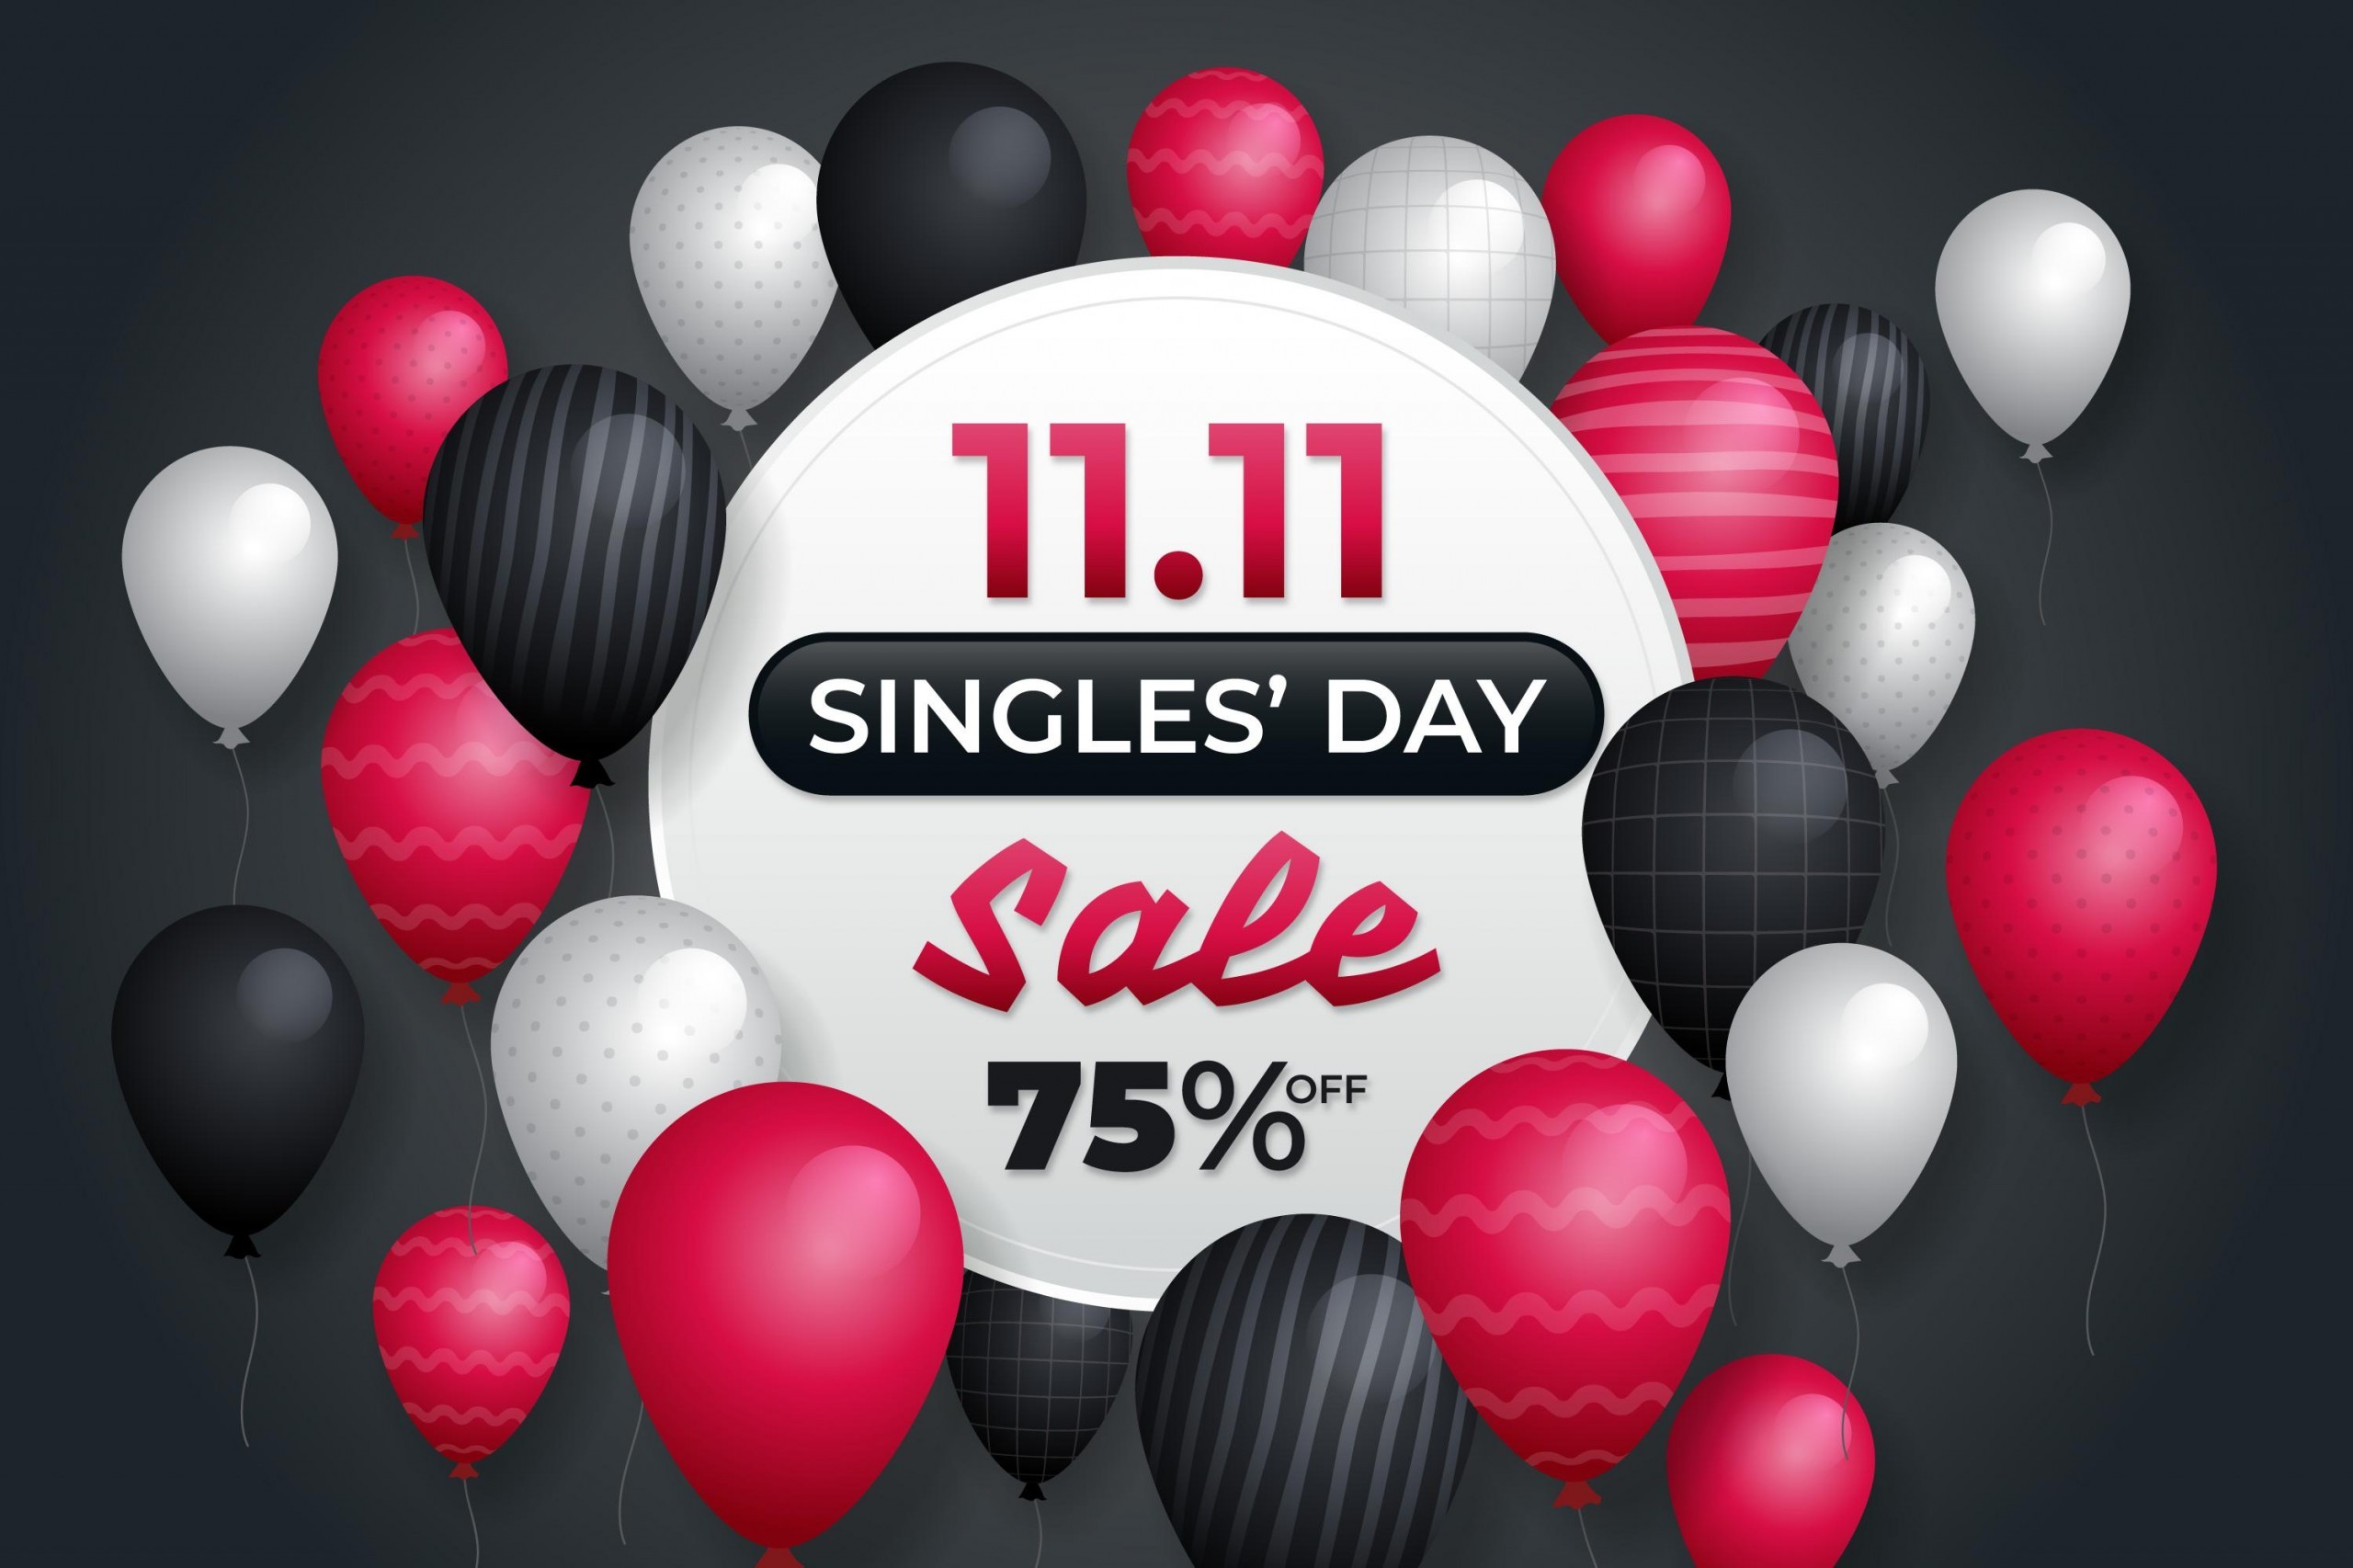 Image of a Singles’ Day sales poster